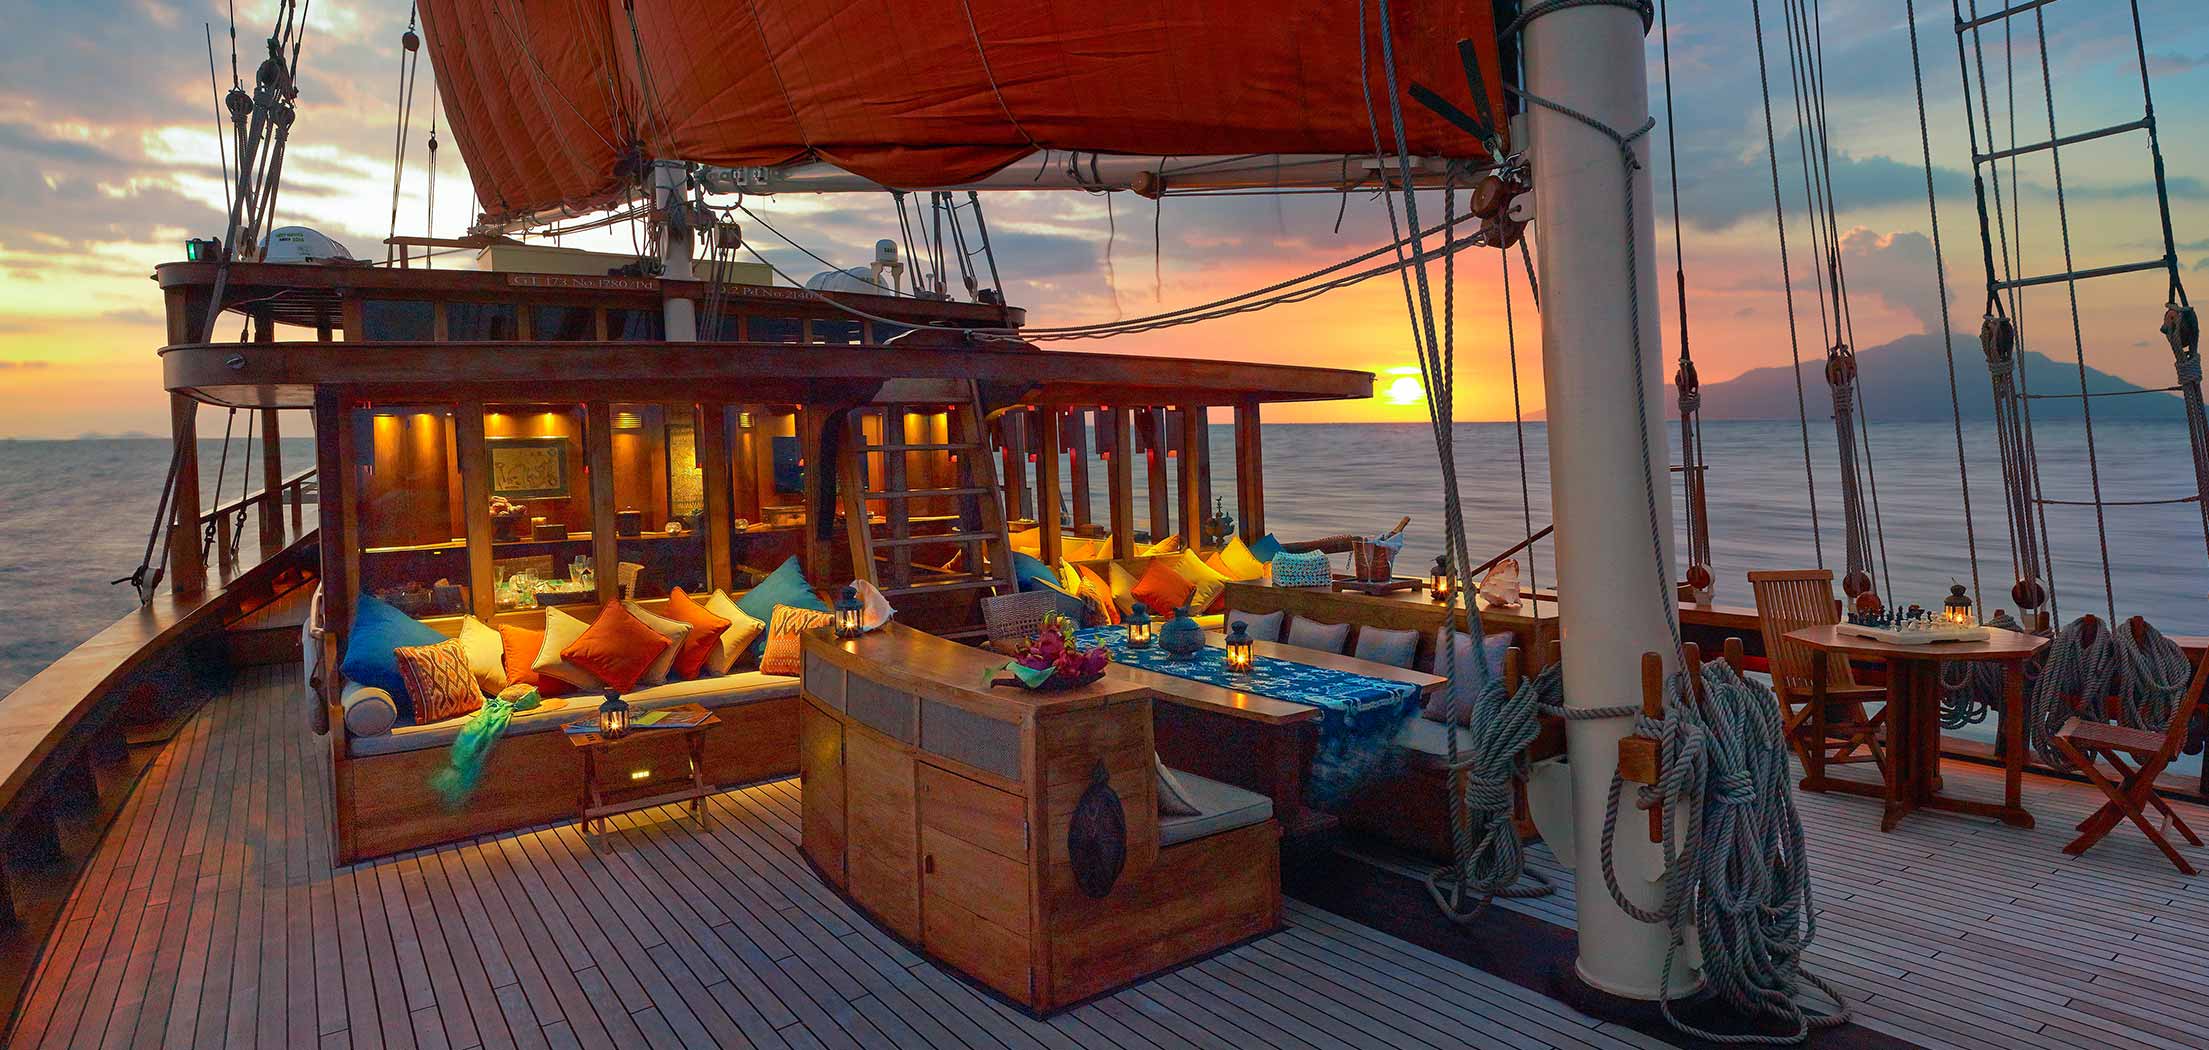 Outside dining area on deck of a luxury wooden Indonesian yacht for charter at sunset